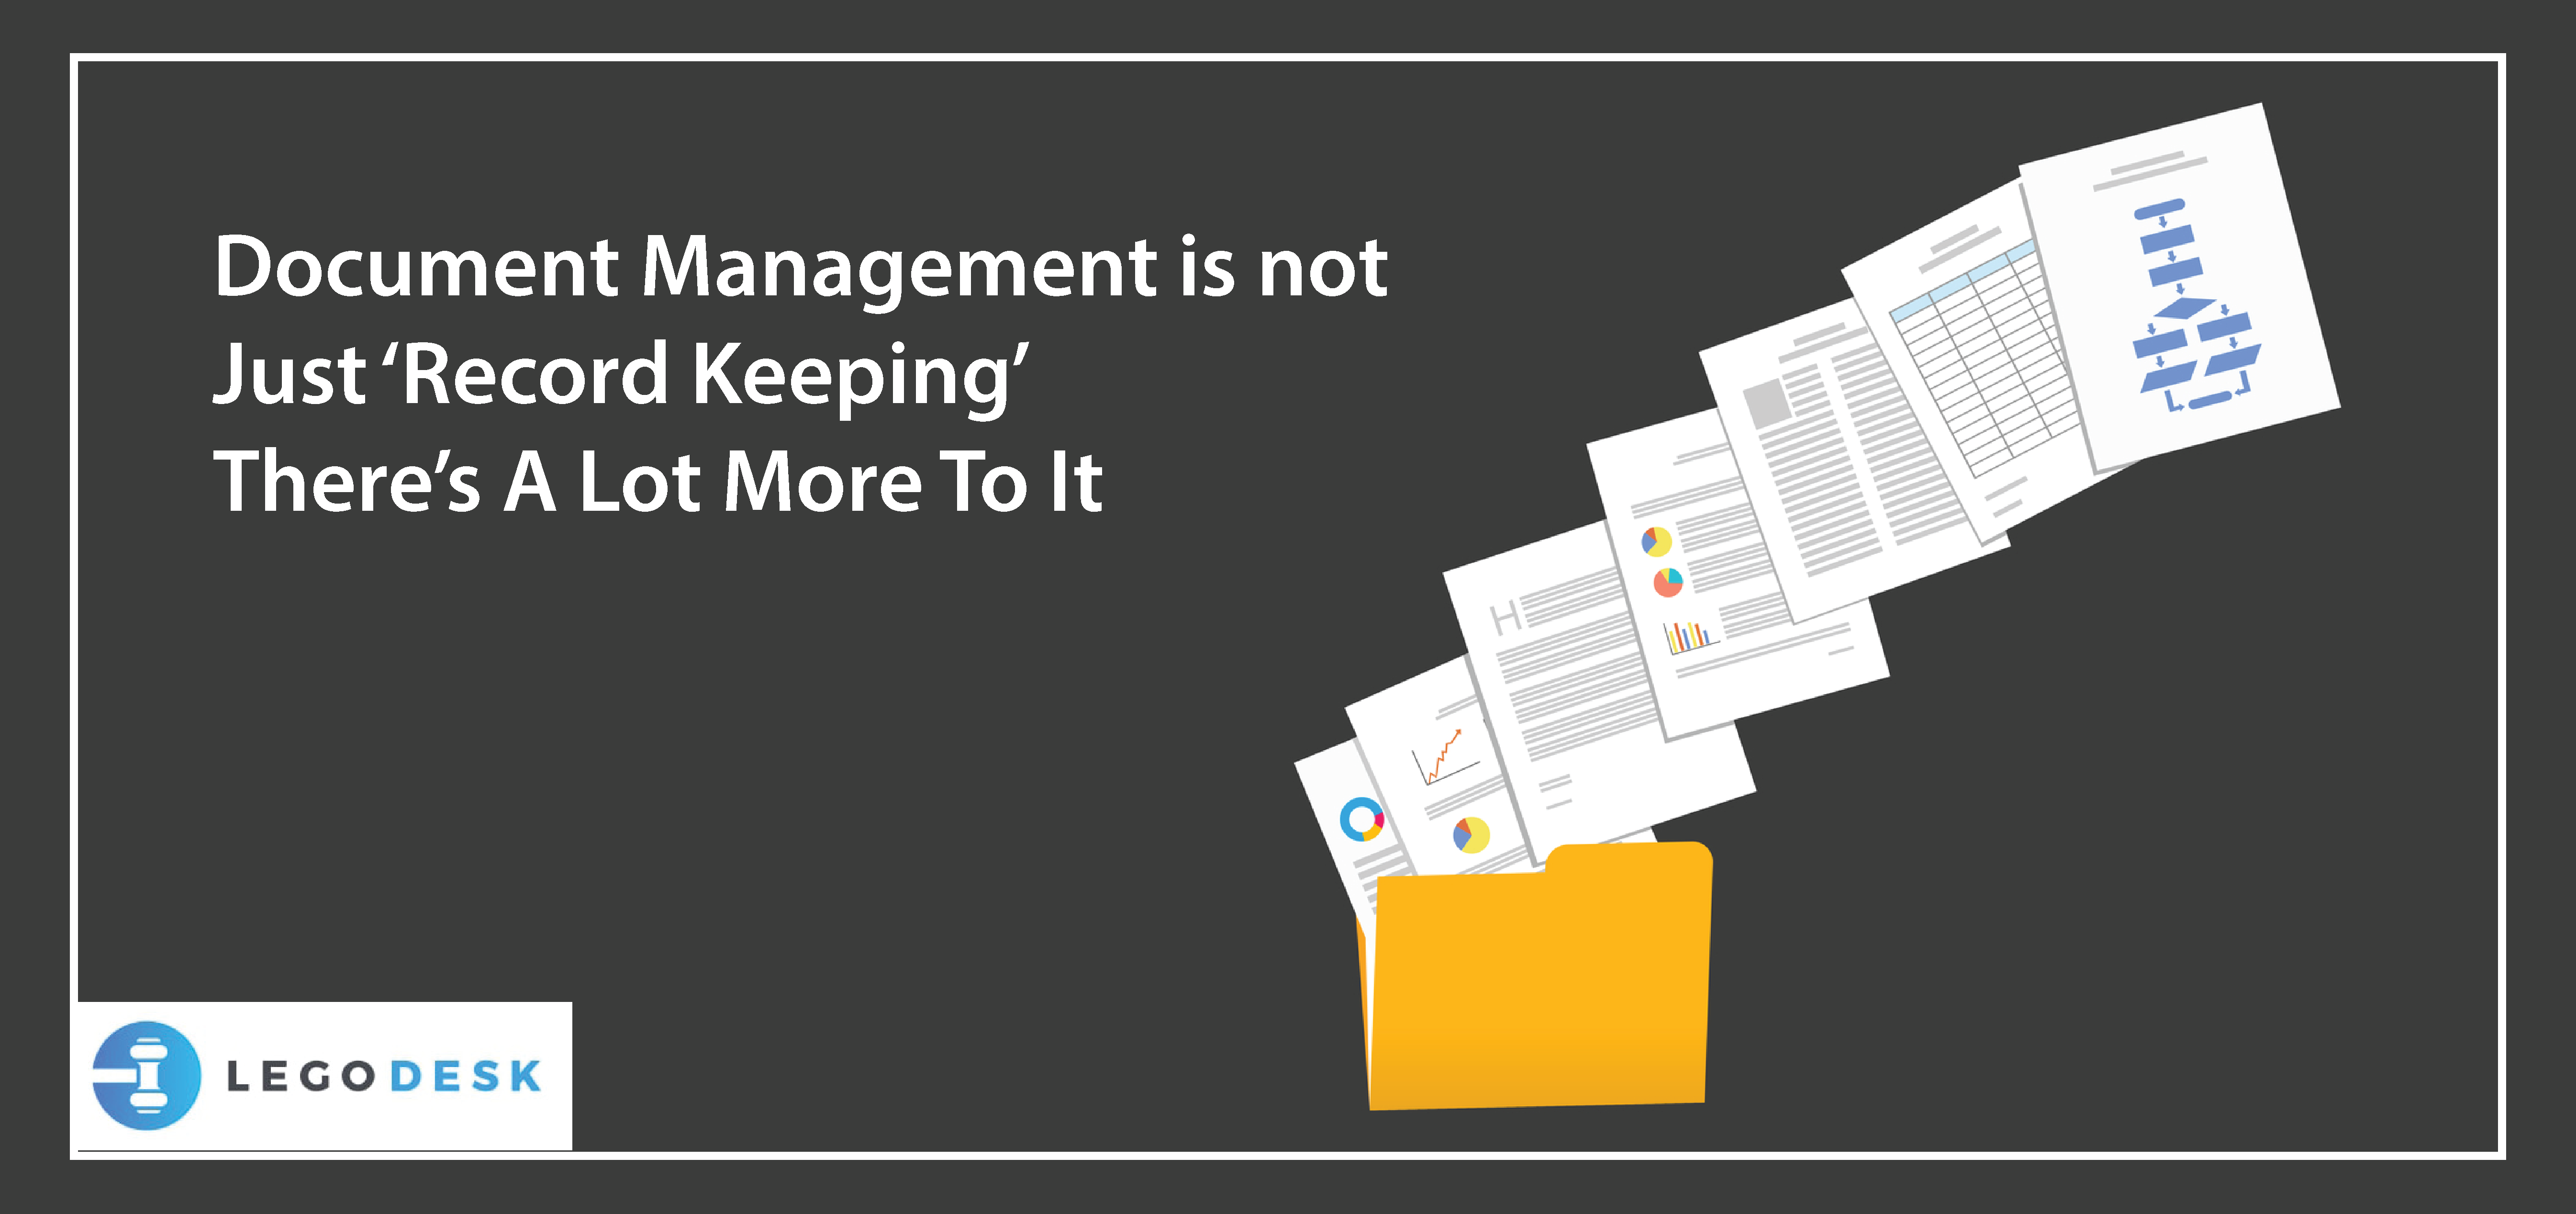 Document Management: Not Just a ‘Record Keeping’ Method